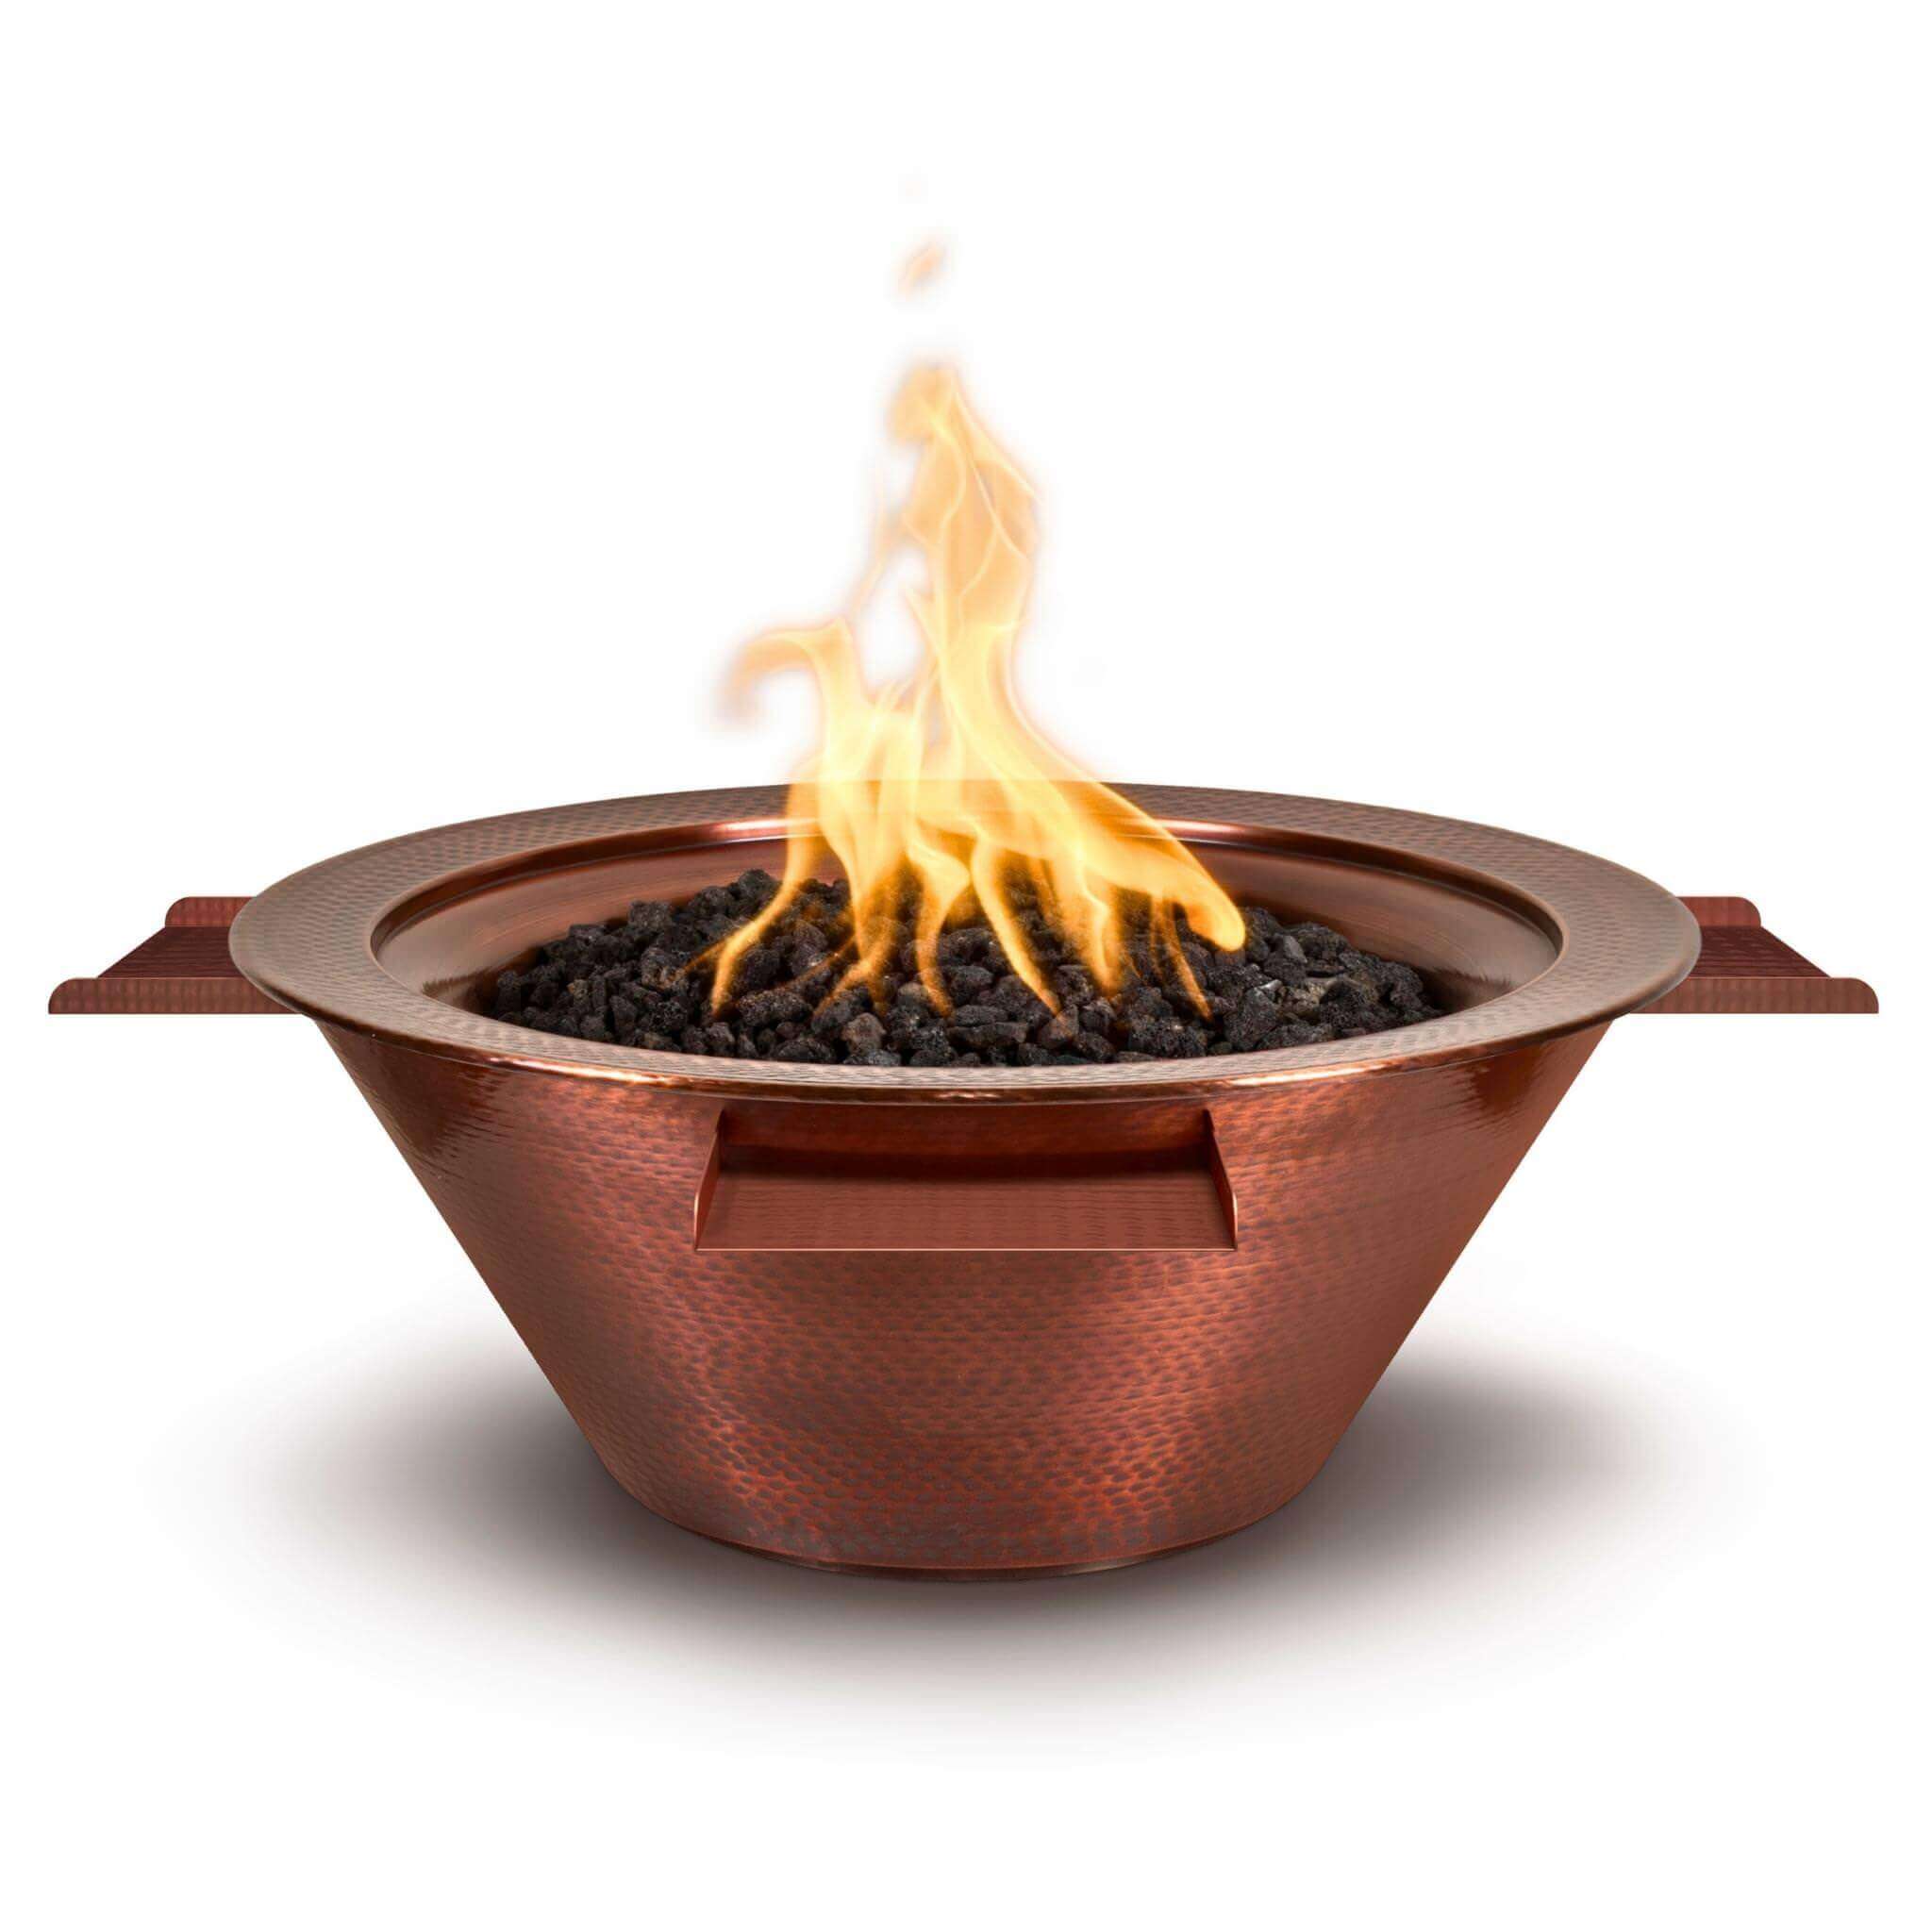 "Cazo" 4-Way Spill Copper Fire & Water Bowl - The Outdoor Plus